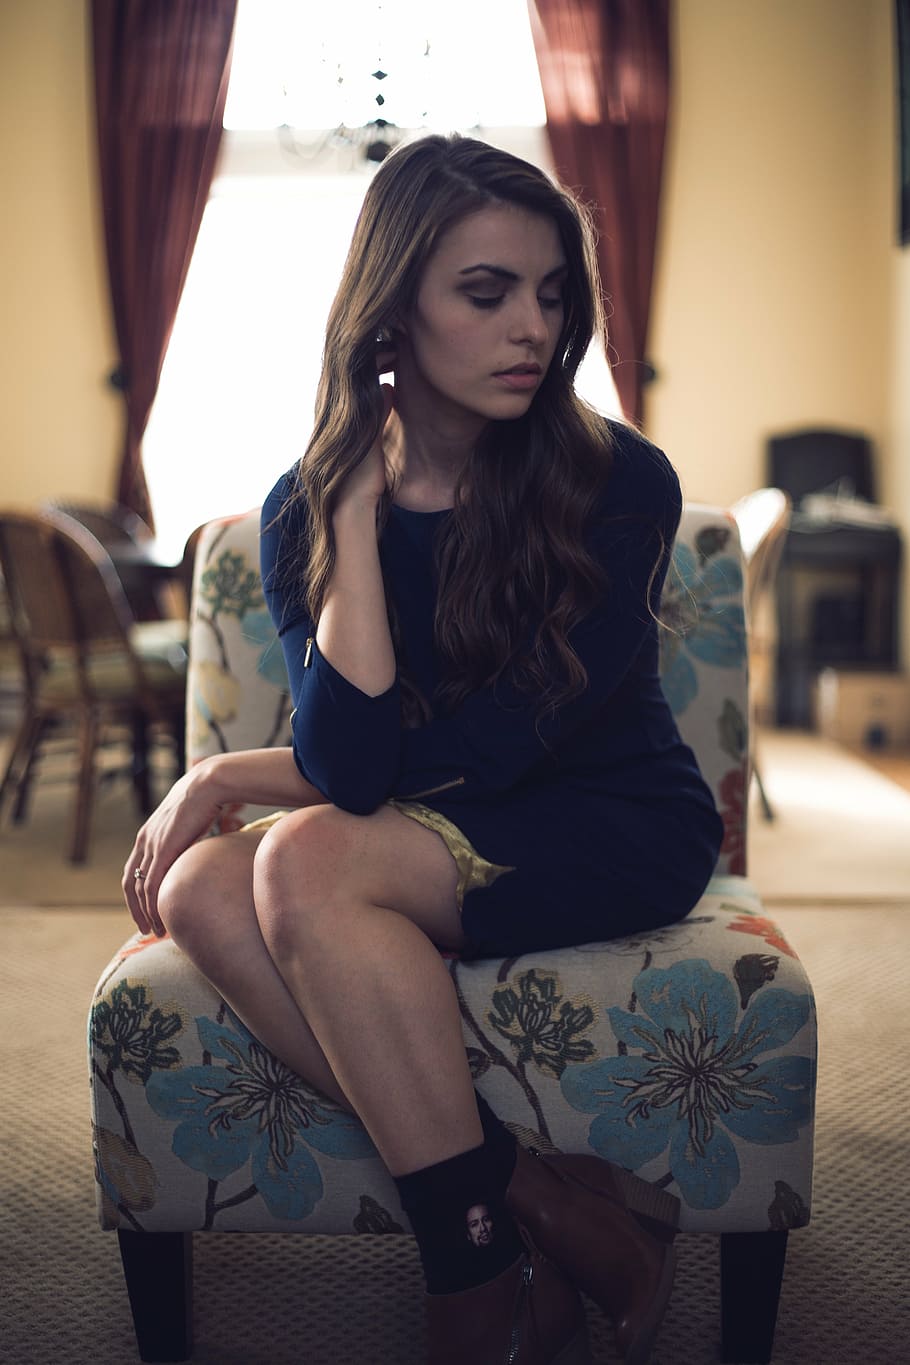 woman, blue, mini dress, sitting, floral, chair, people, girl, alone, room